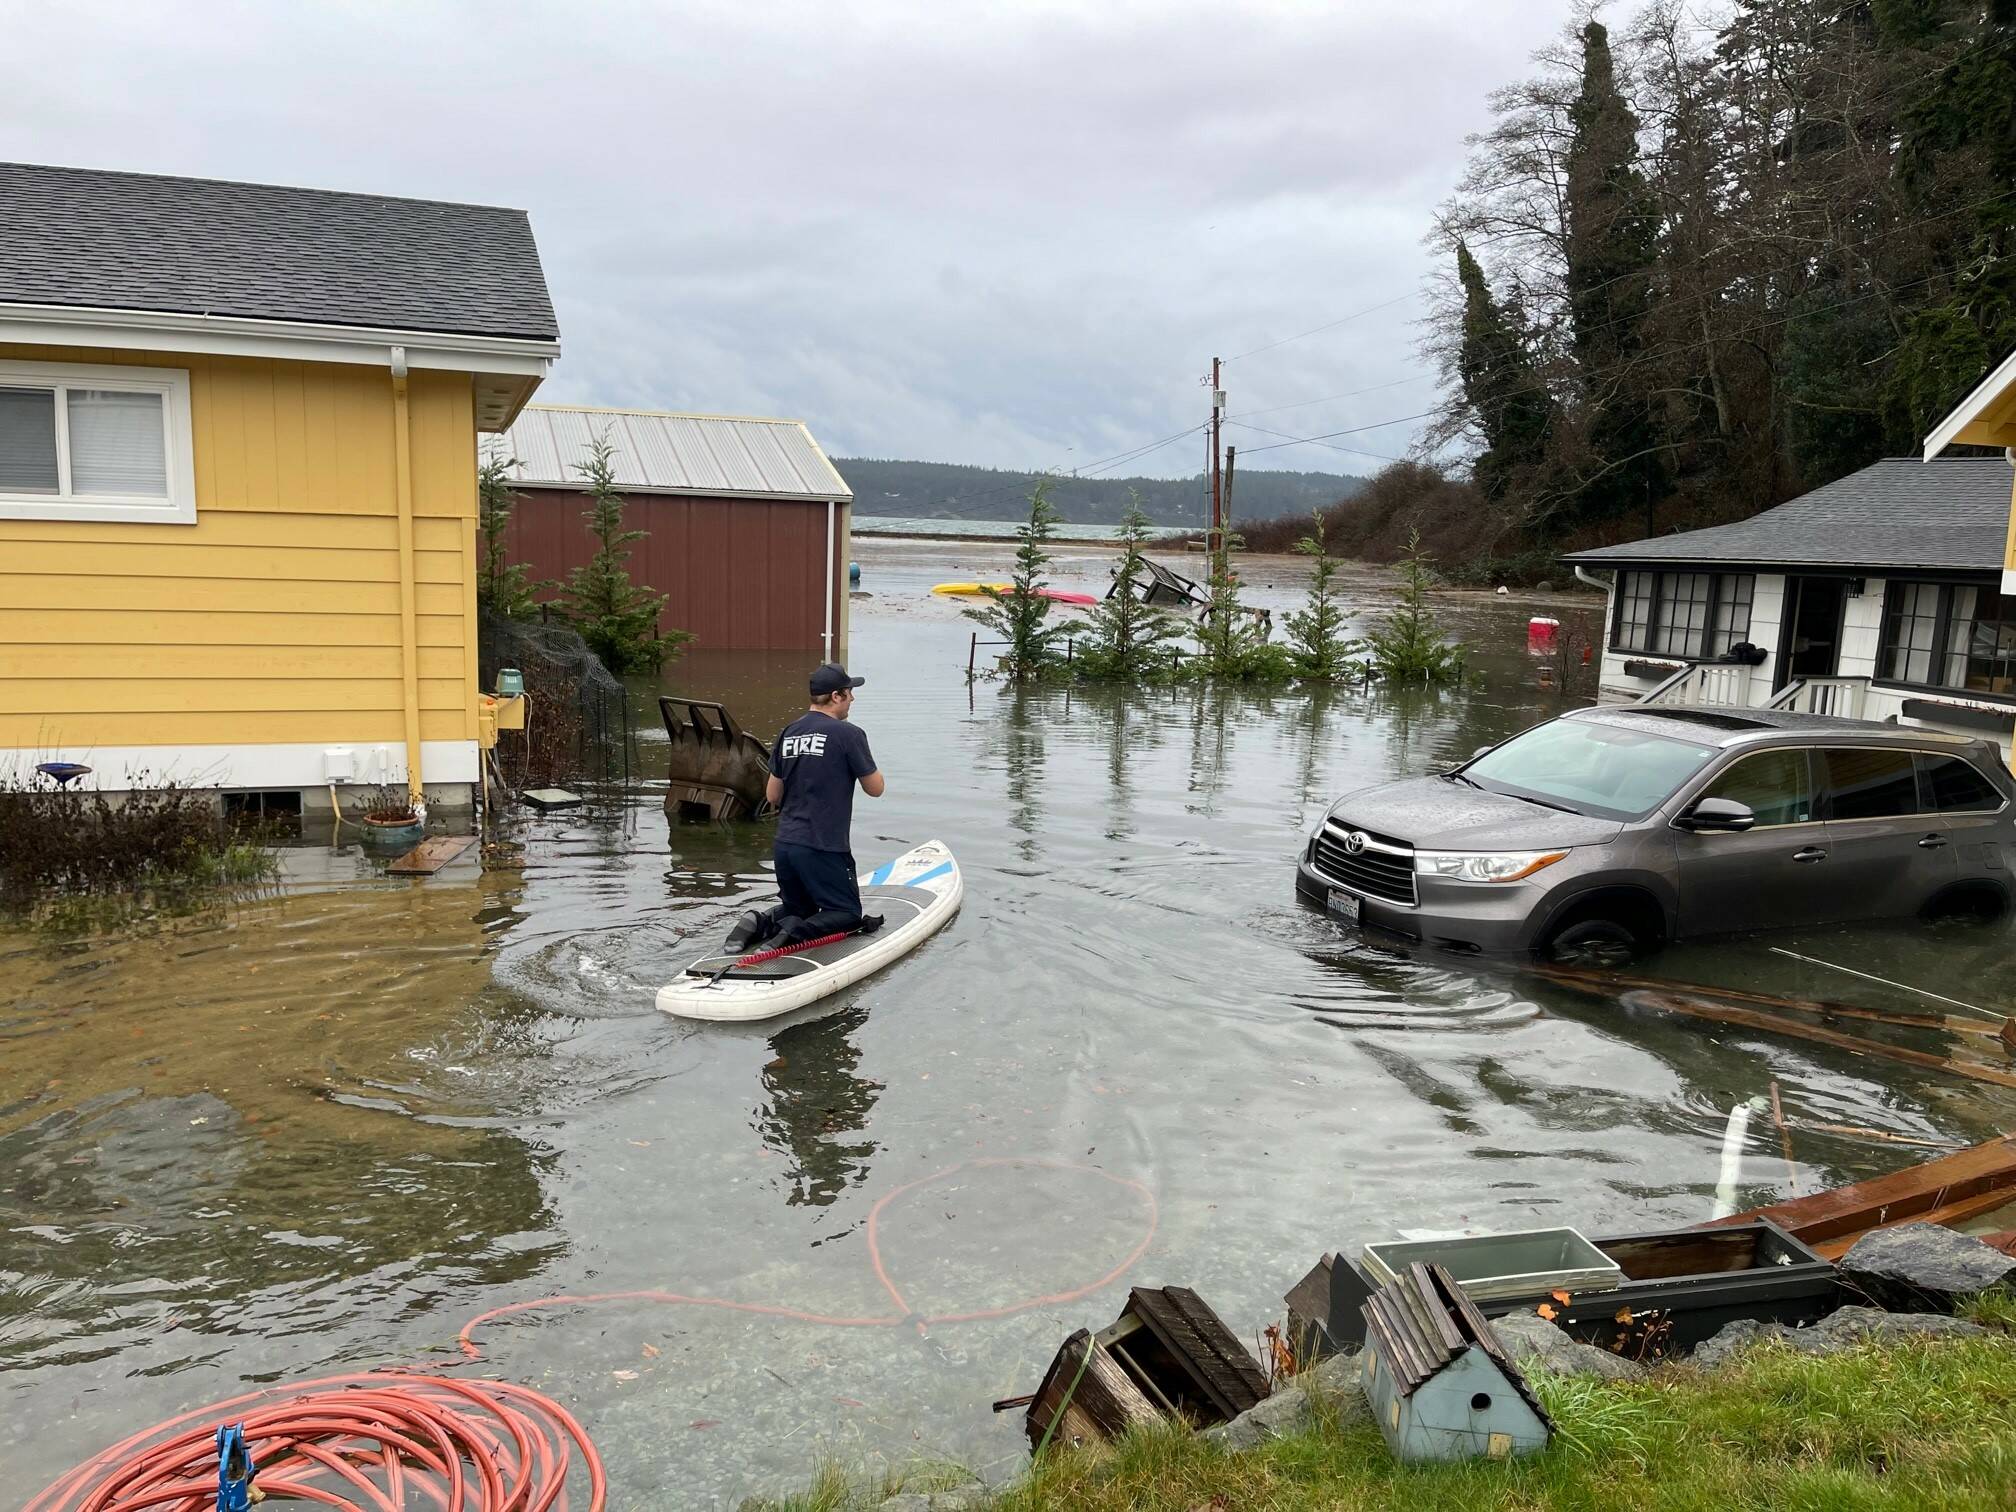 A Central Whidbey Island Fire and Rescue firefighter paddleboards between flooded homes in Greenbank. (Photo provided)